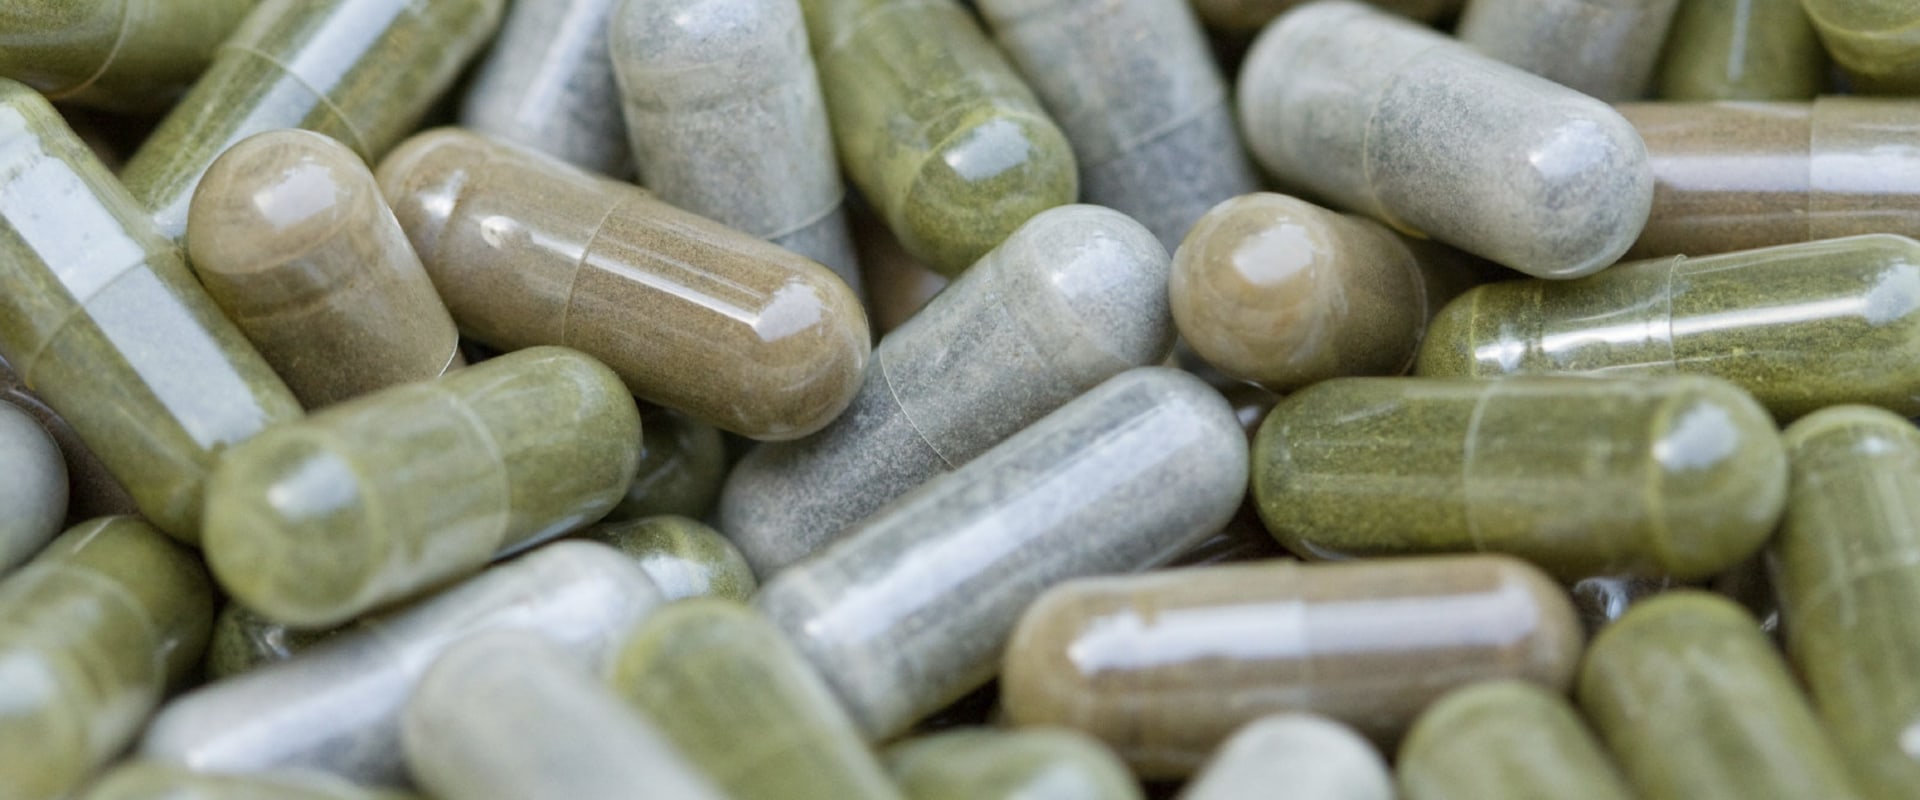 Are Dietary and Herbal Supplements Dangerous? An Expert's Perspective